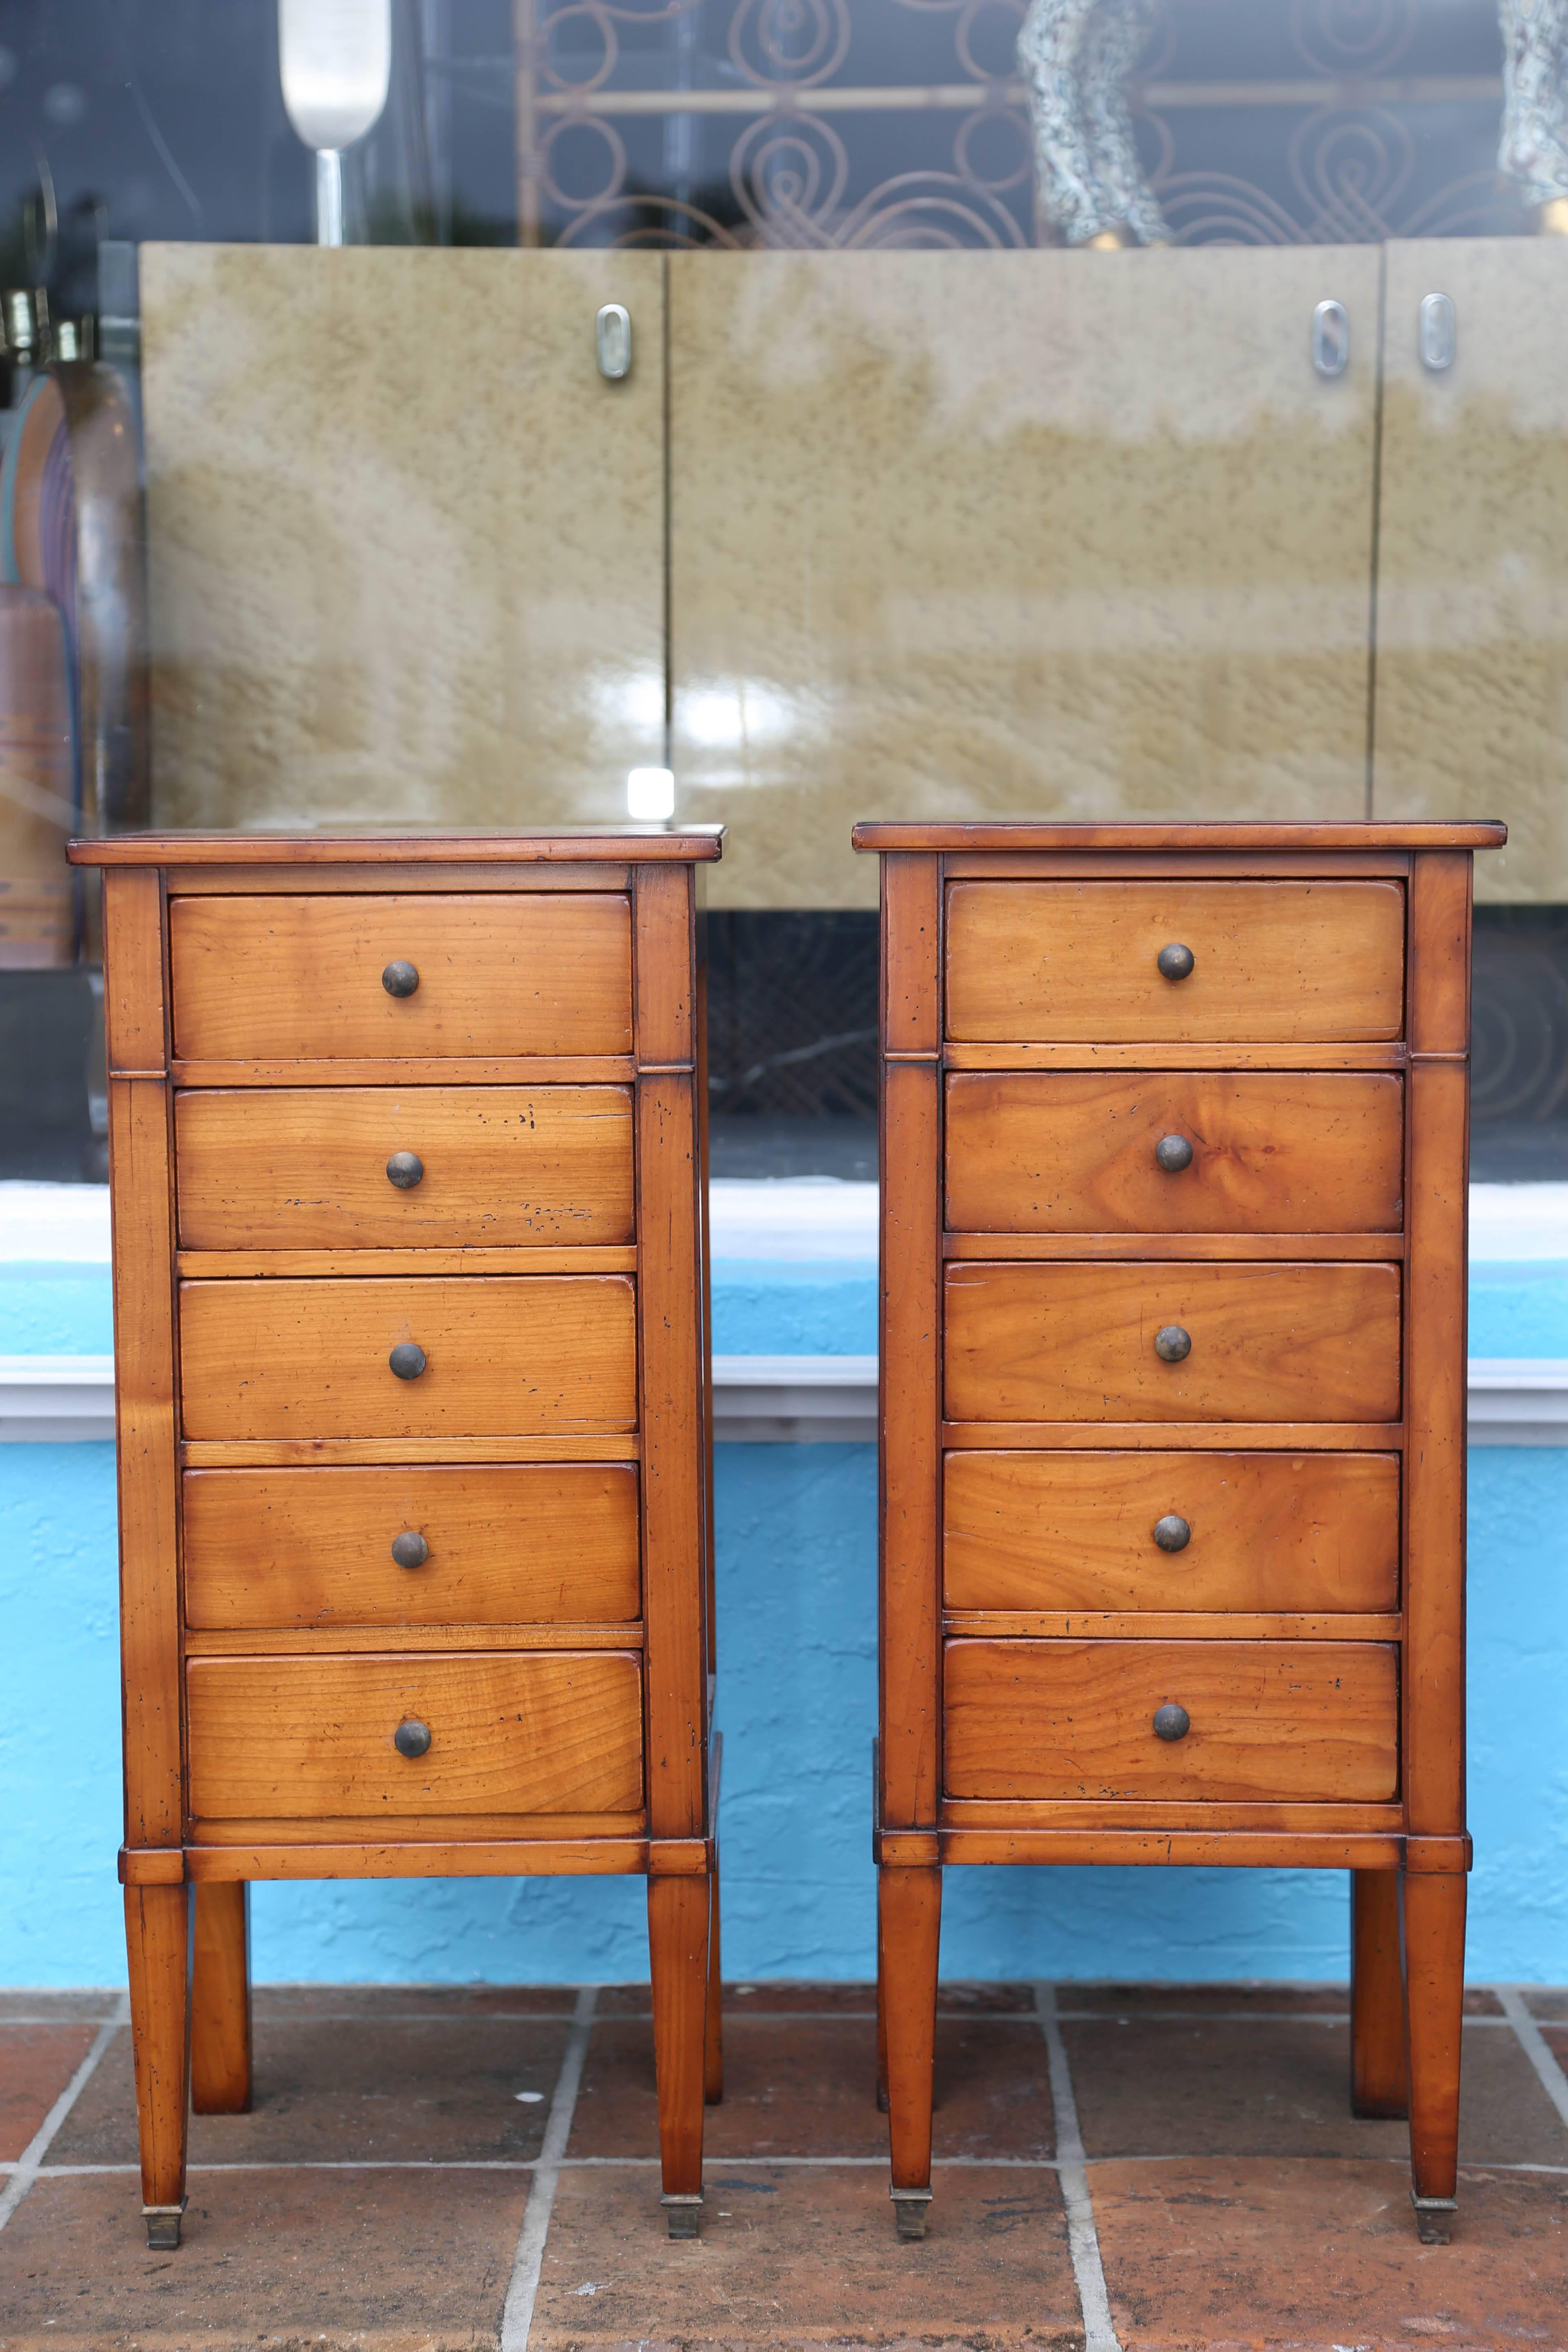 An eye-catching pair of superb quality. Each is fitted with five drawers.